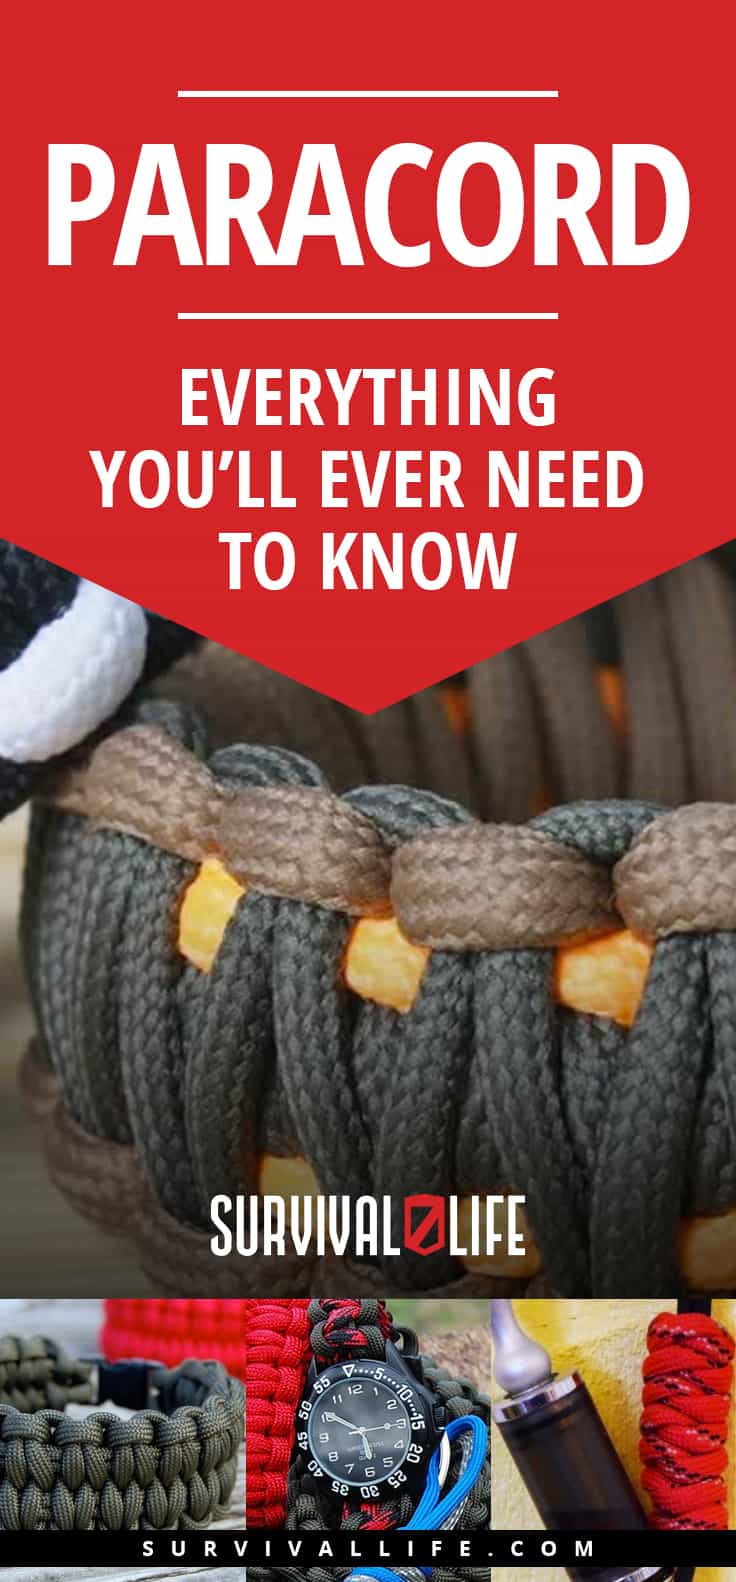  Paracord: Everything You'll Ever Need to Know|https://survivallife.com/all-about-paracord/